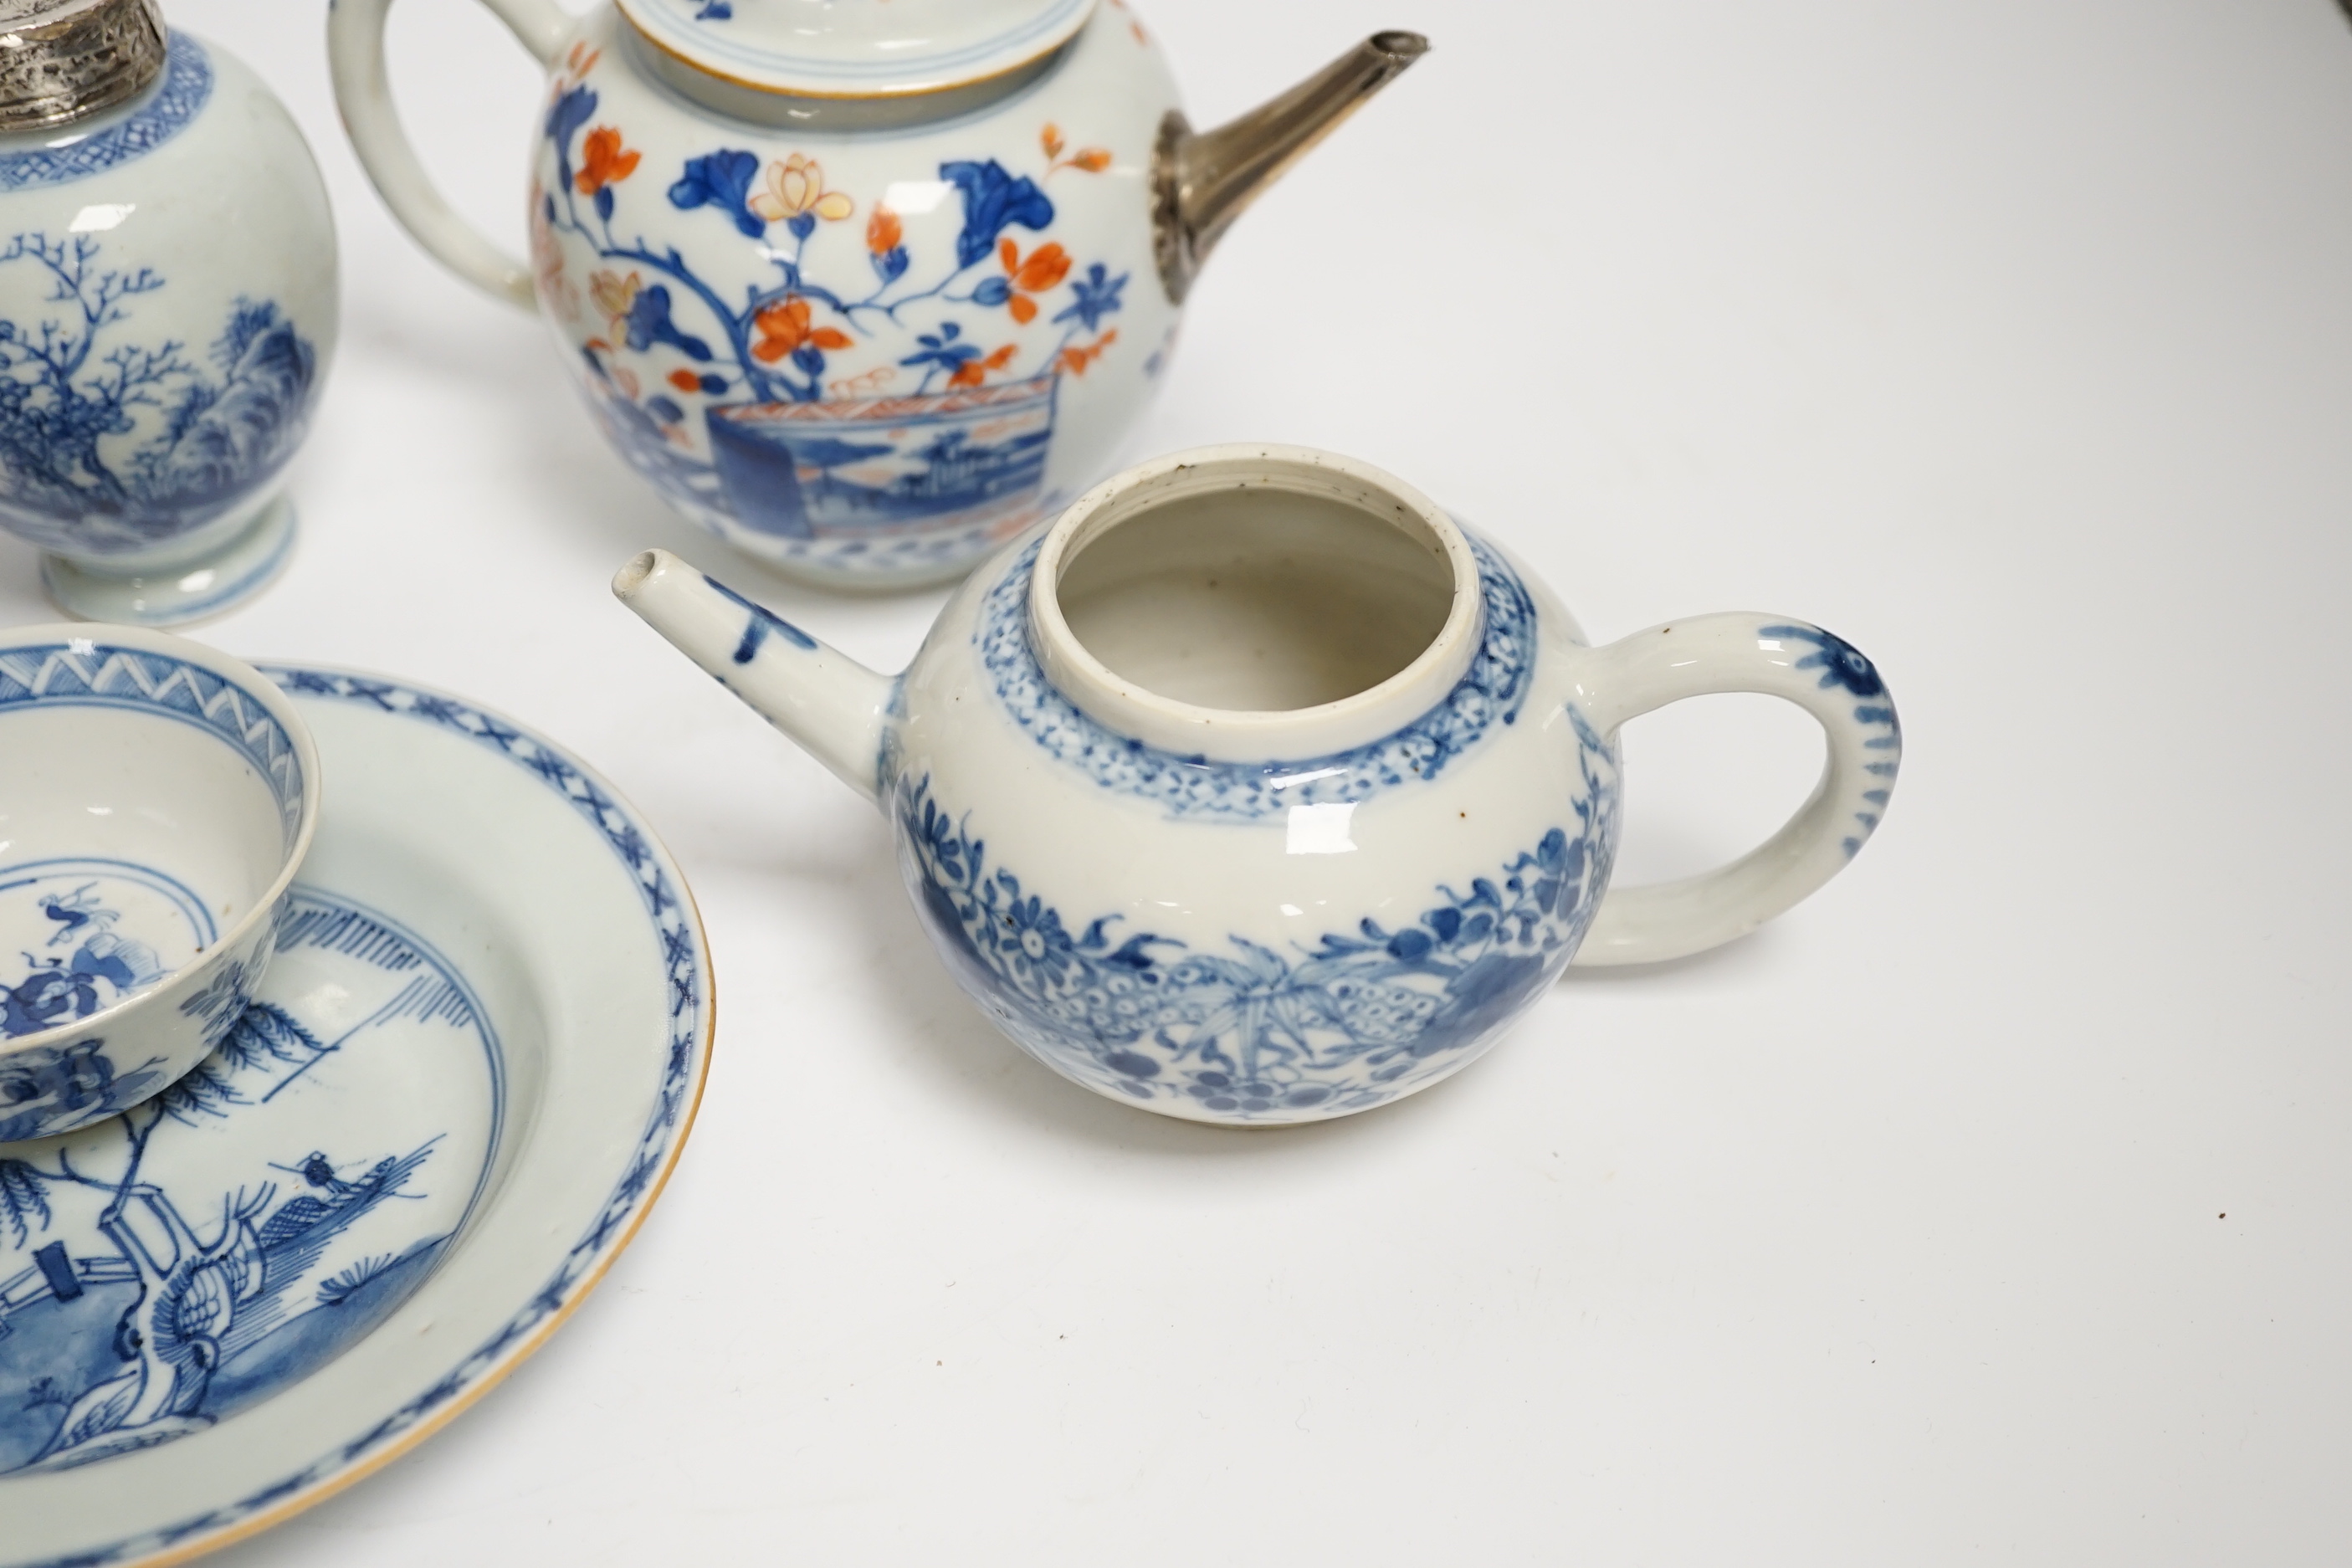 18th / 19th century Chinese export porcelain: two teapots, a tea canister, a plate and a teabowl, - Image 2 of 9